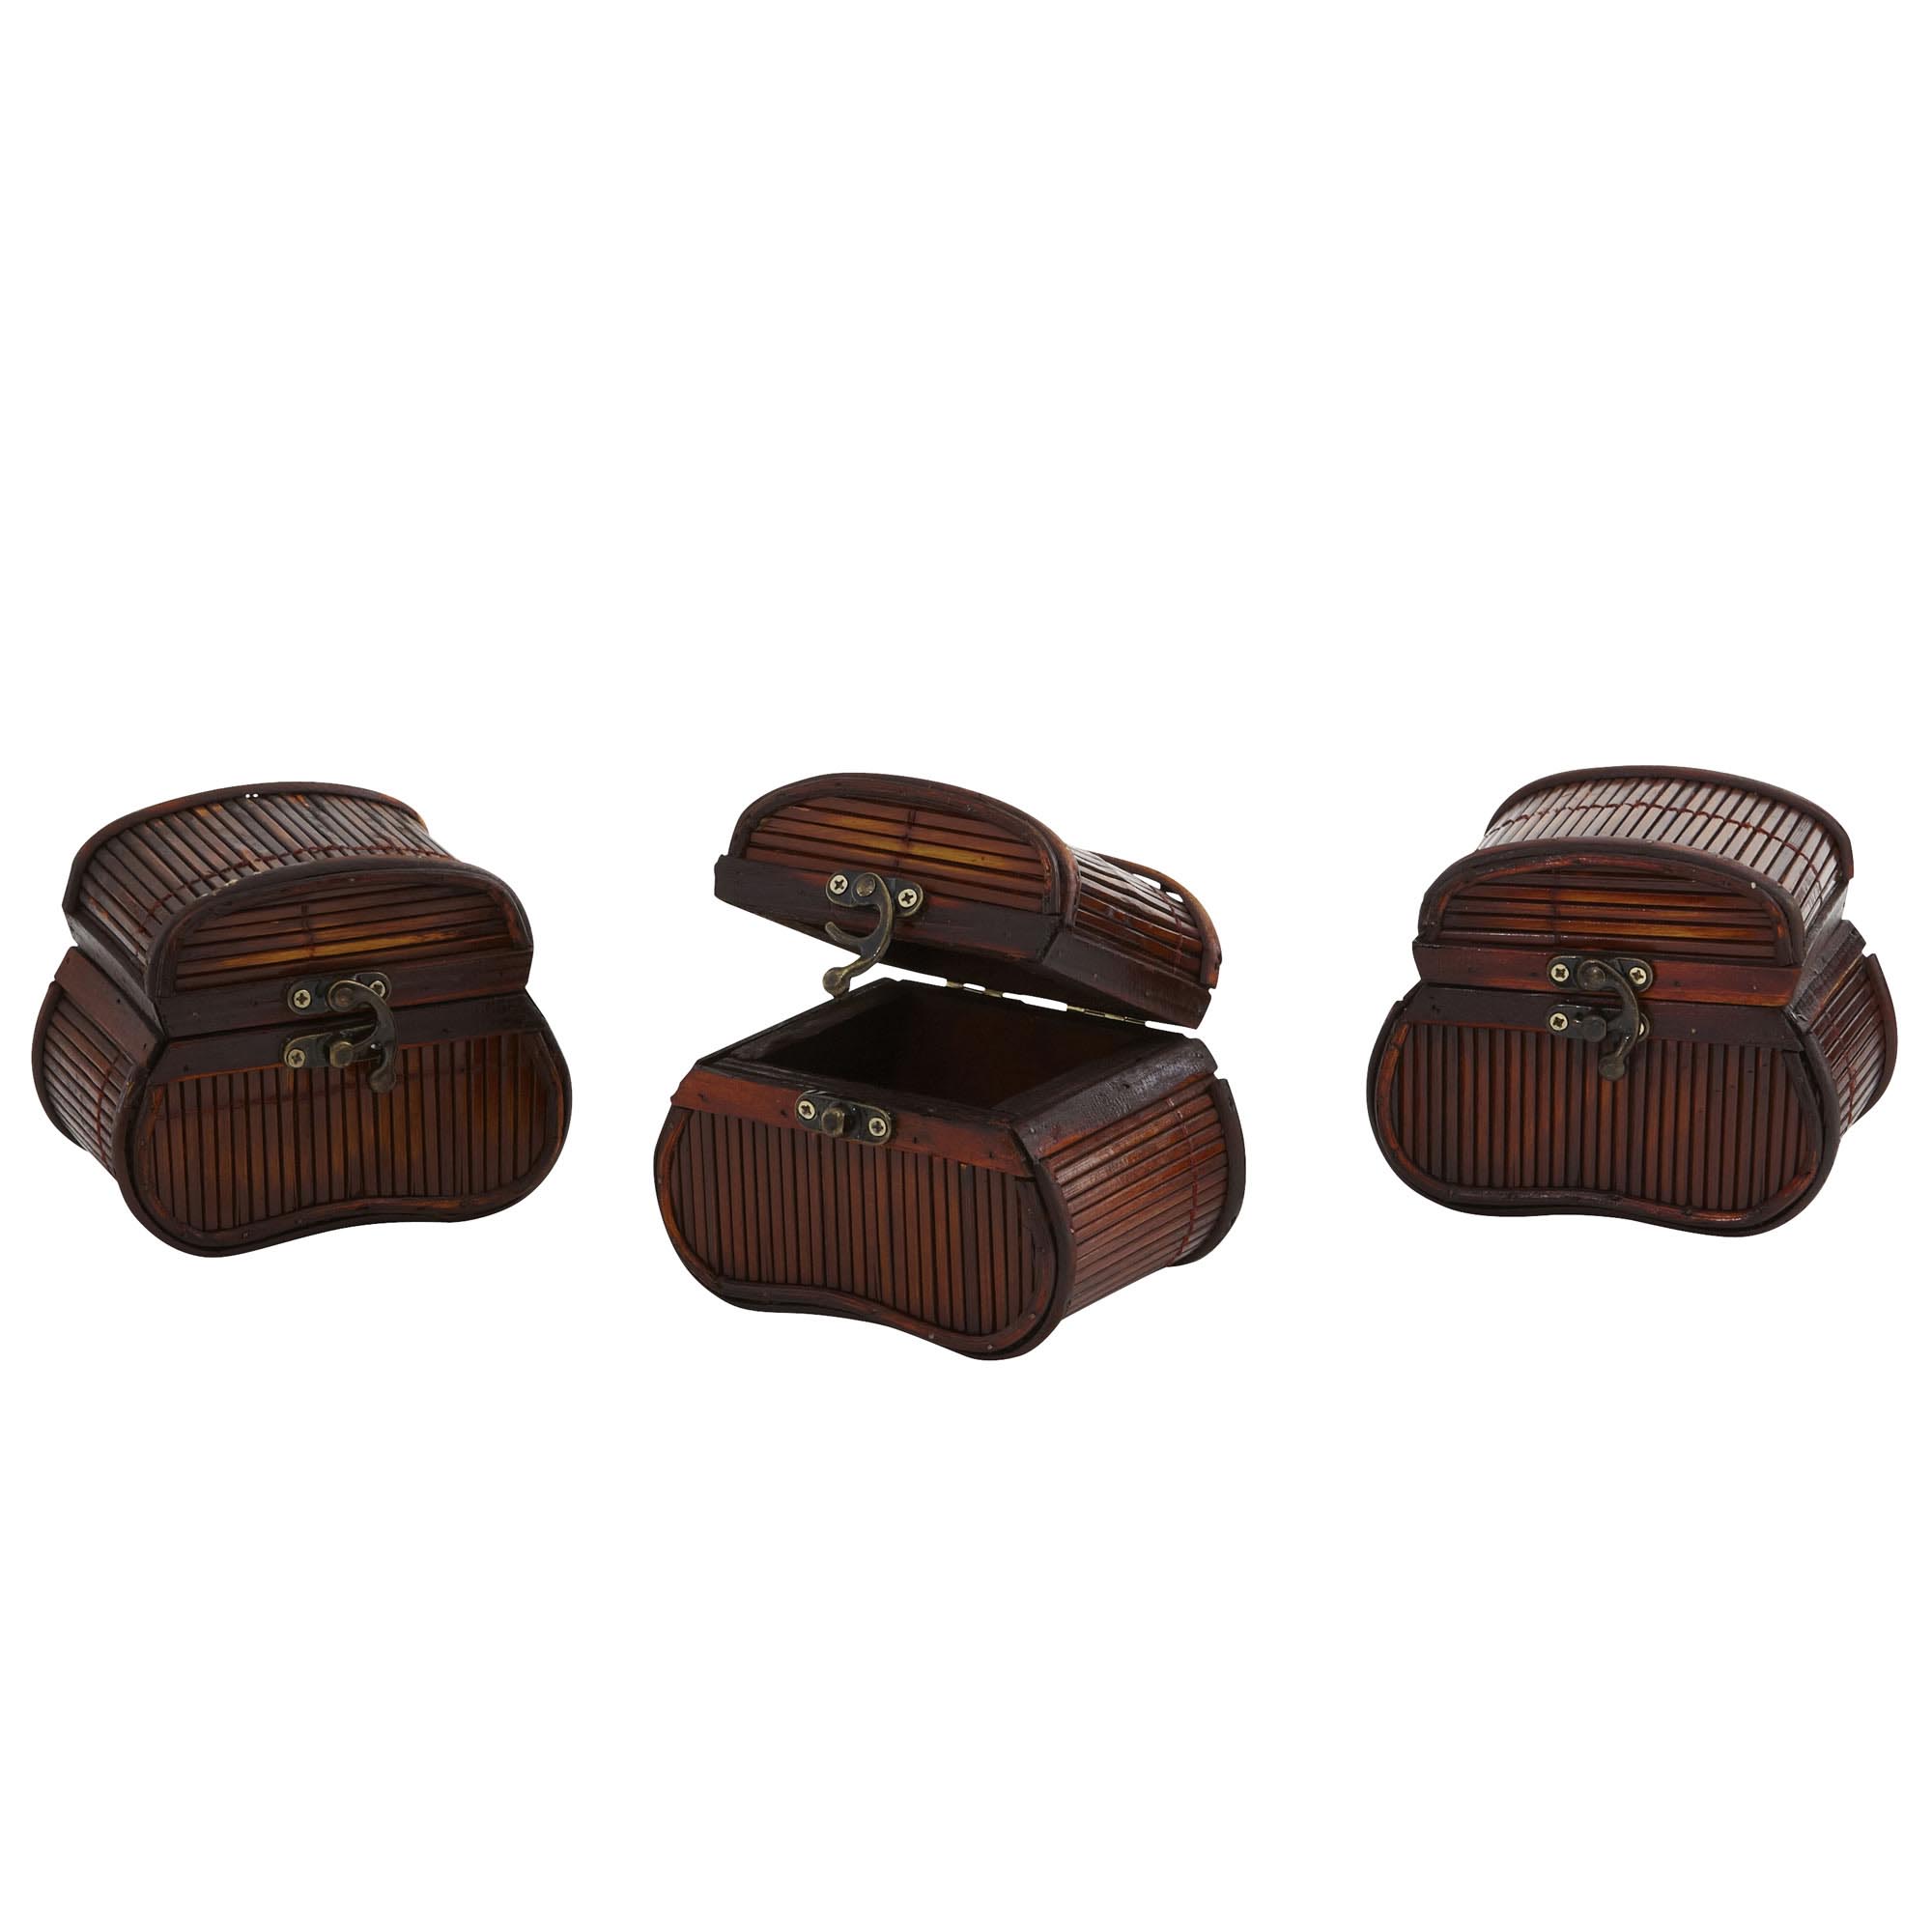 4 Inch Bamboo Chests (set Of 3)